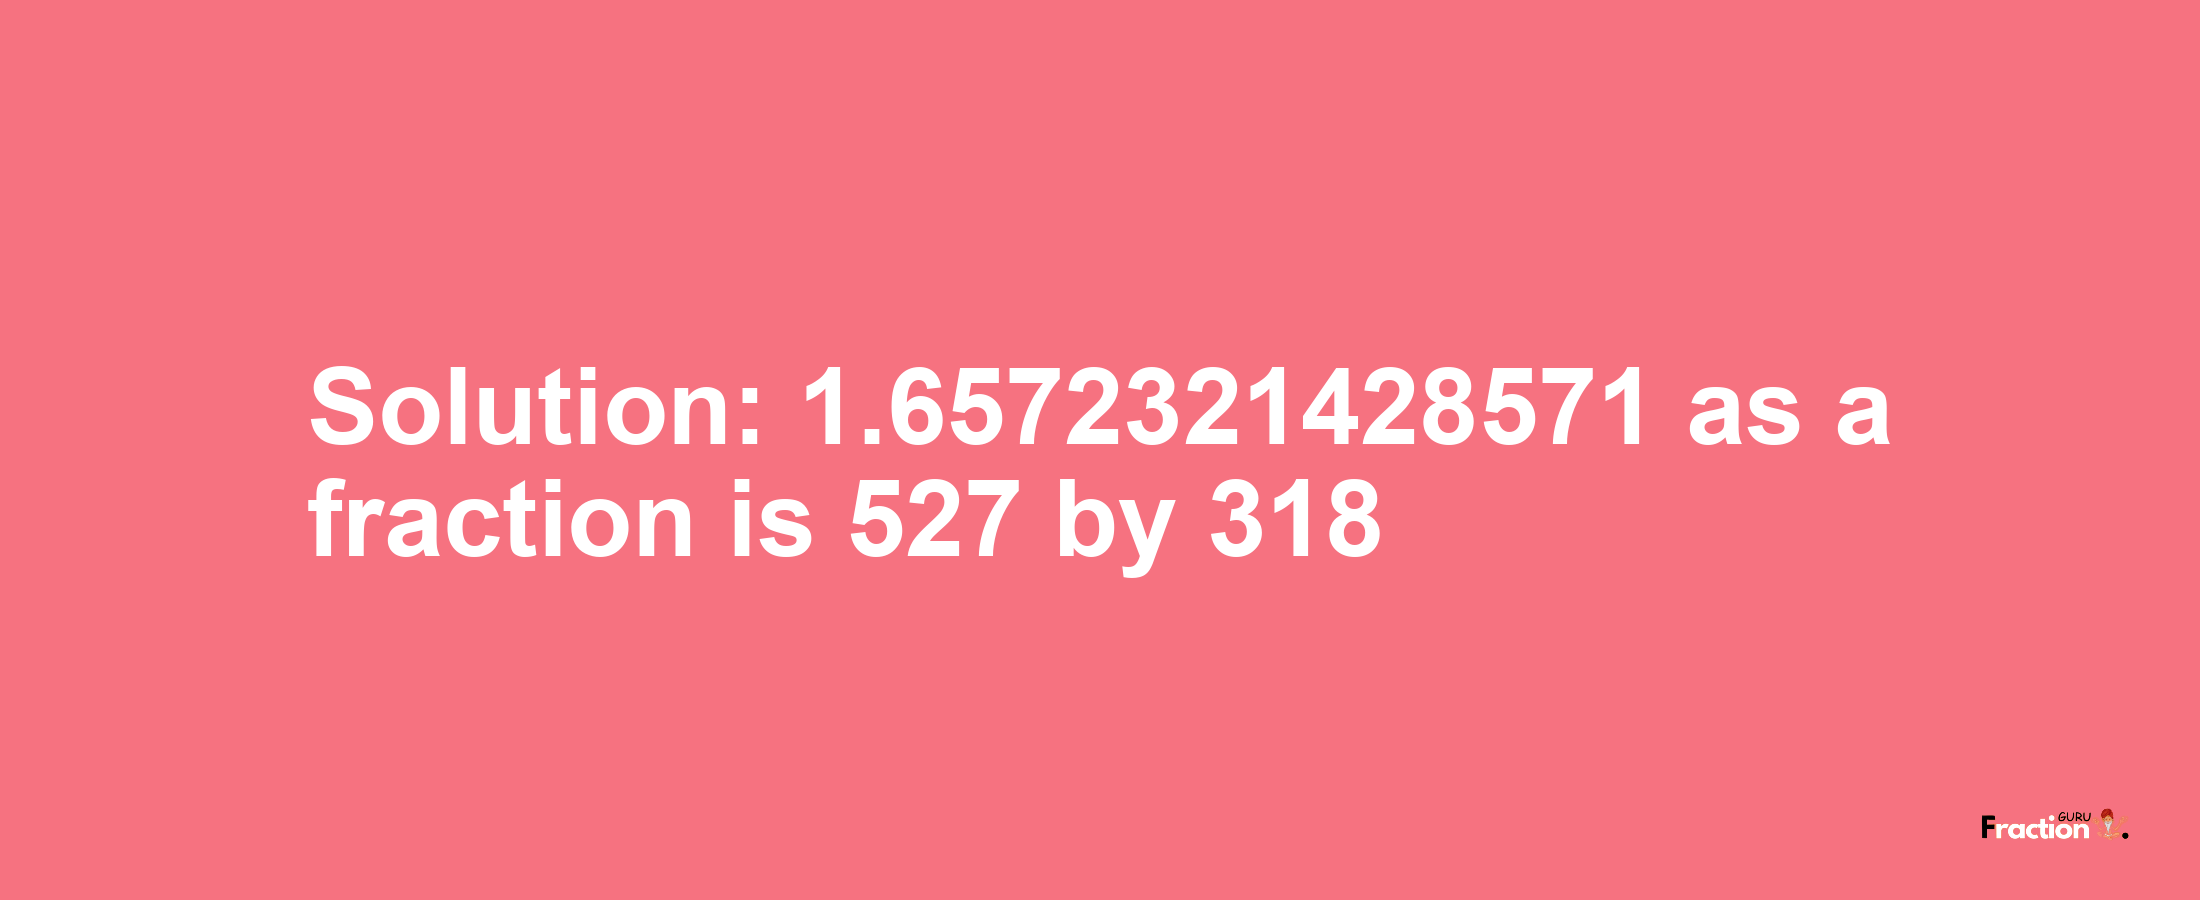 Solution:1.6572321428571 as a fraction is 527/318